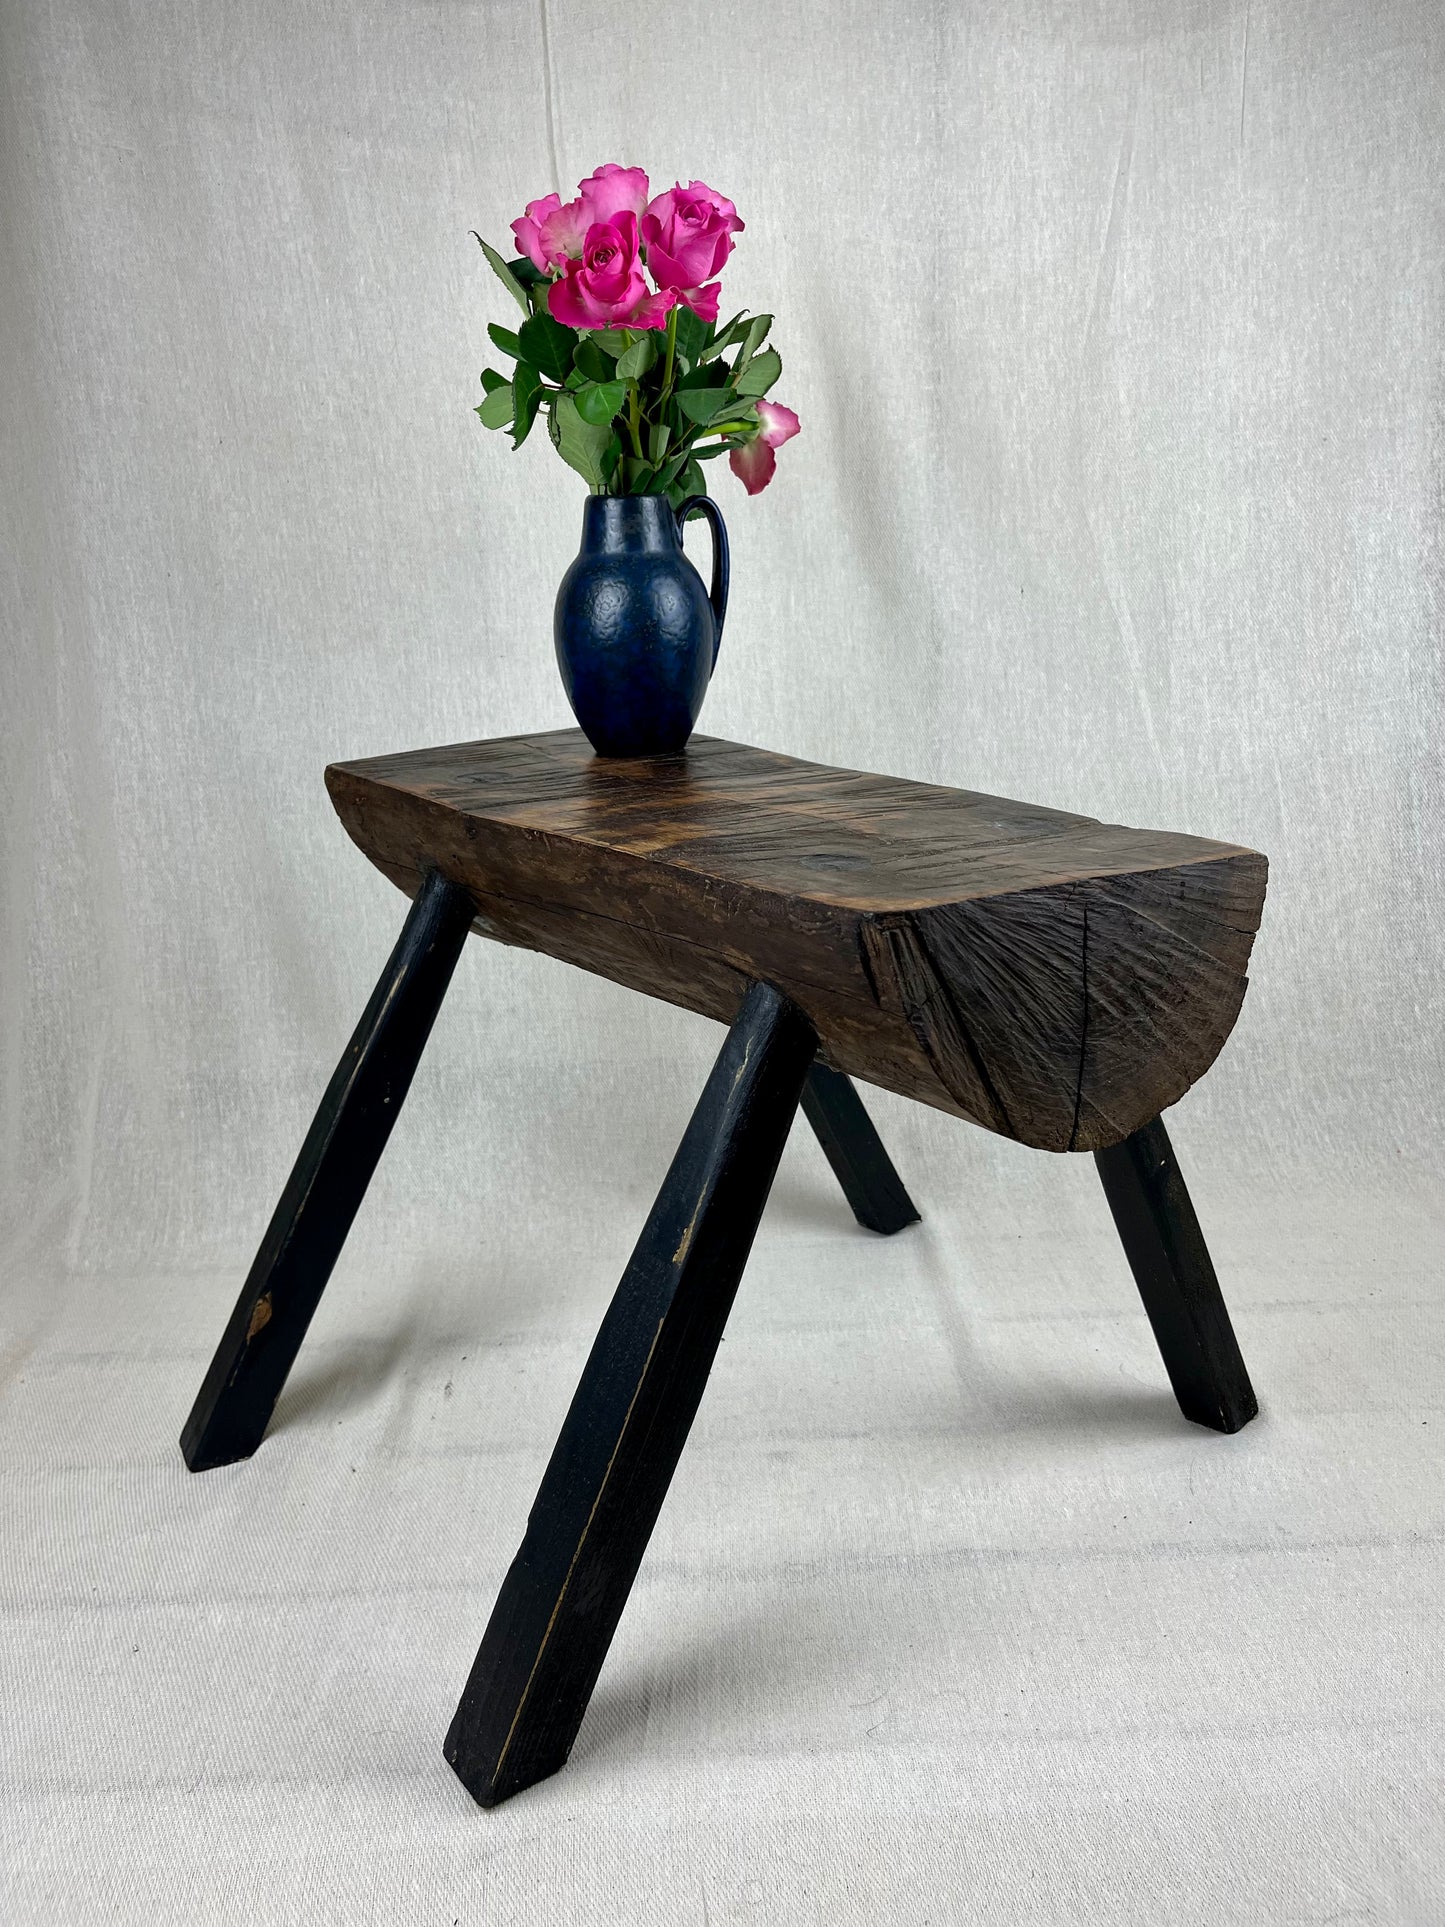 FRENCH BRUTALIST CHOPPING BLOCK STOOL